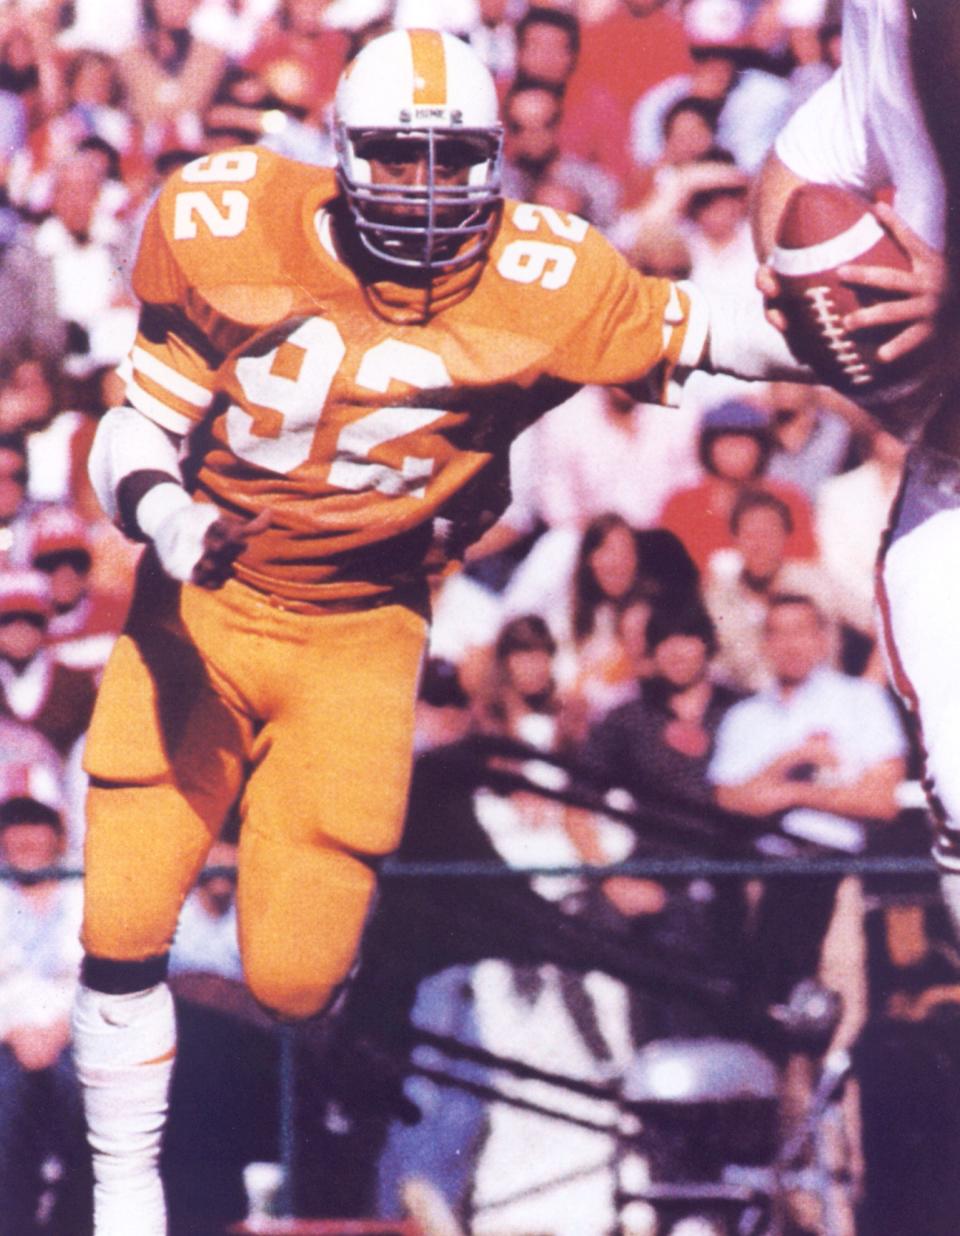 Defensive lineman Reggie White set Tennessee records for sacks in a single game (4) and season (15) in 1983. The Vols retired his No. 92 in 2005, one year after his death.